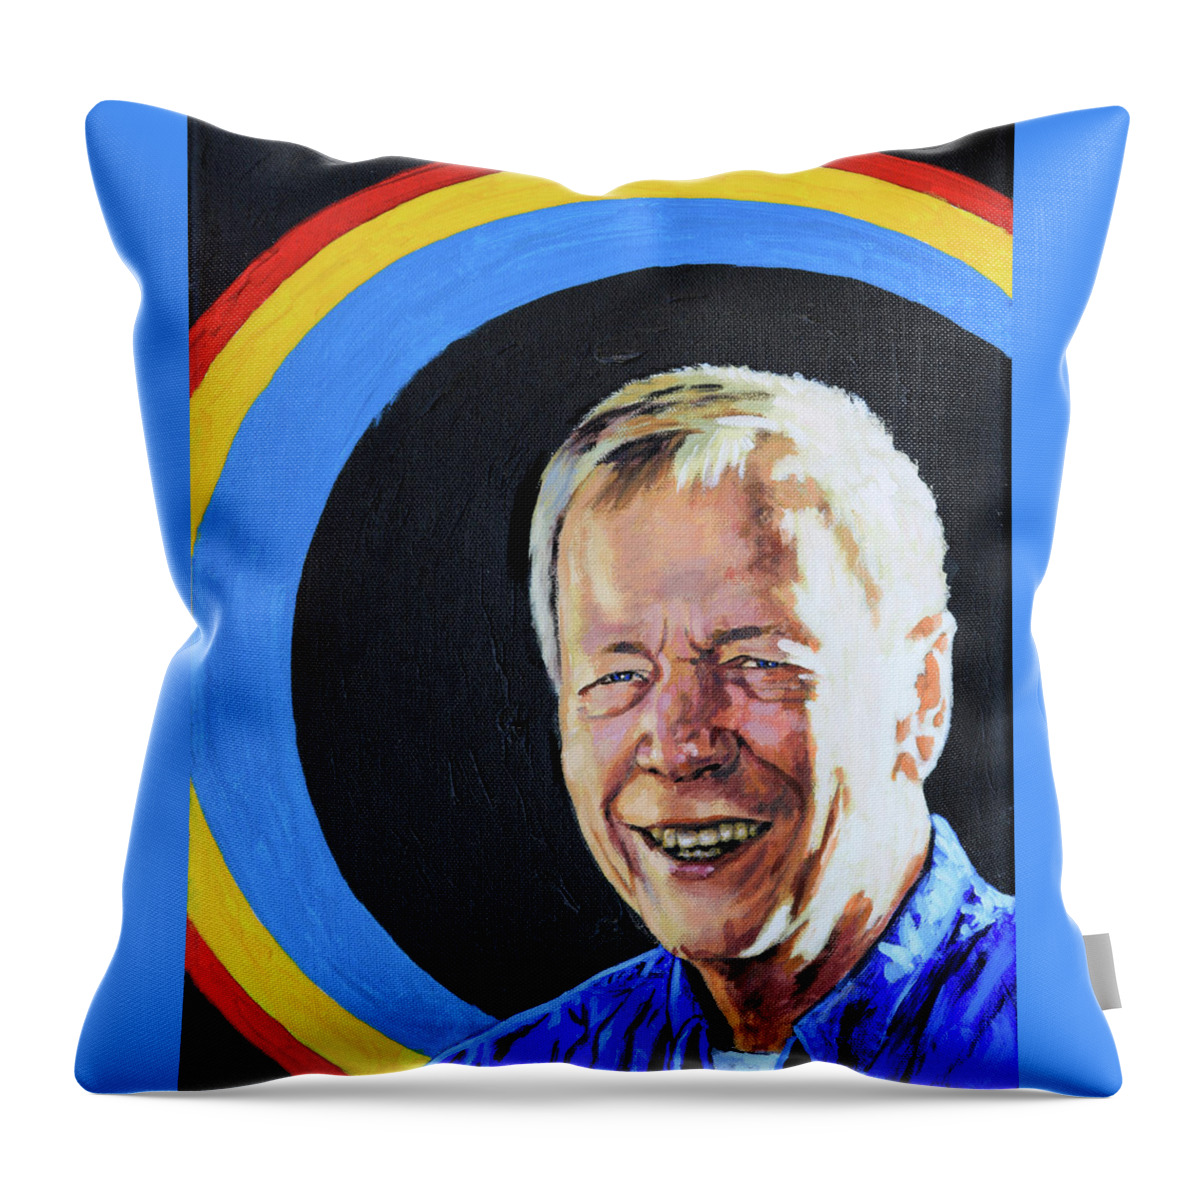 Self Portrait Throw Pillow featuring the painting Self Portrait by John Lautermilch